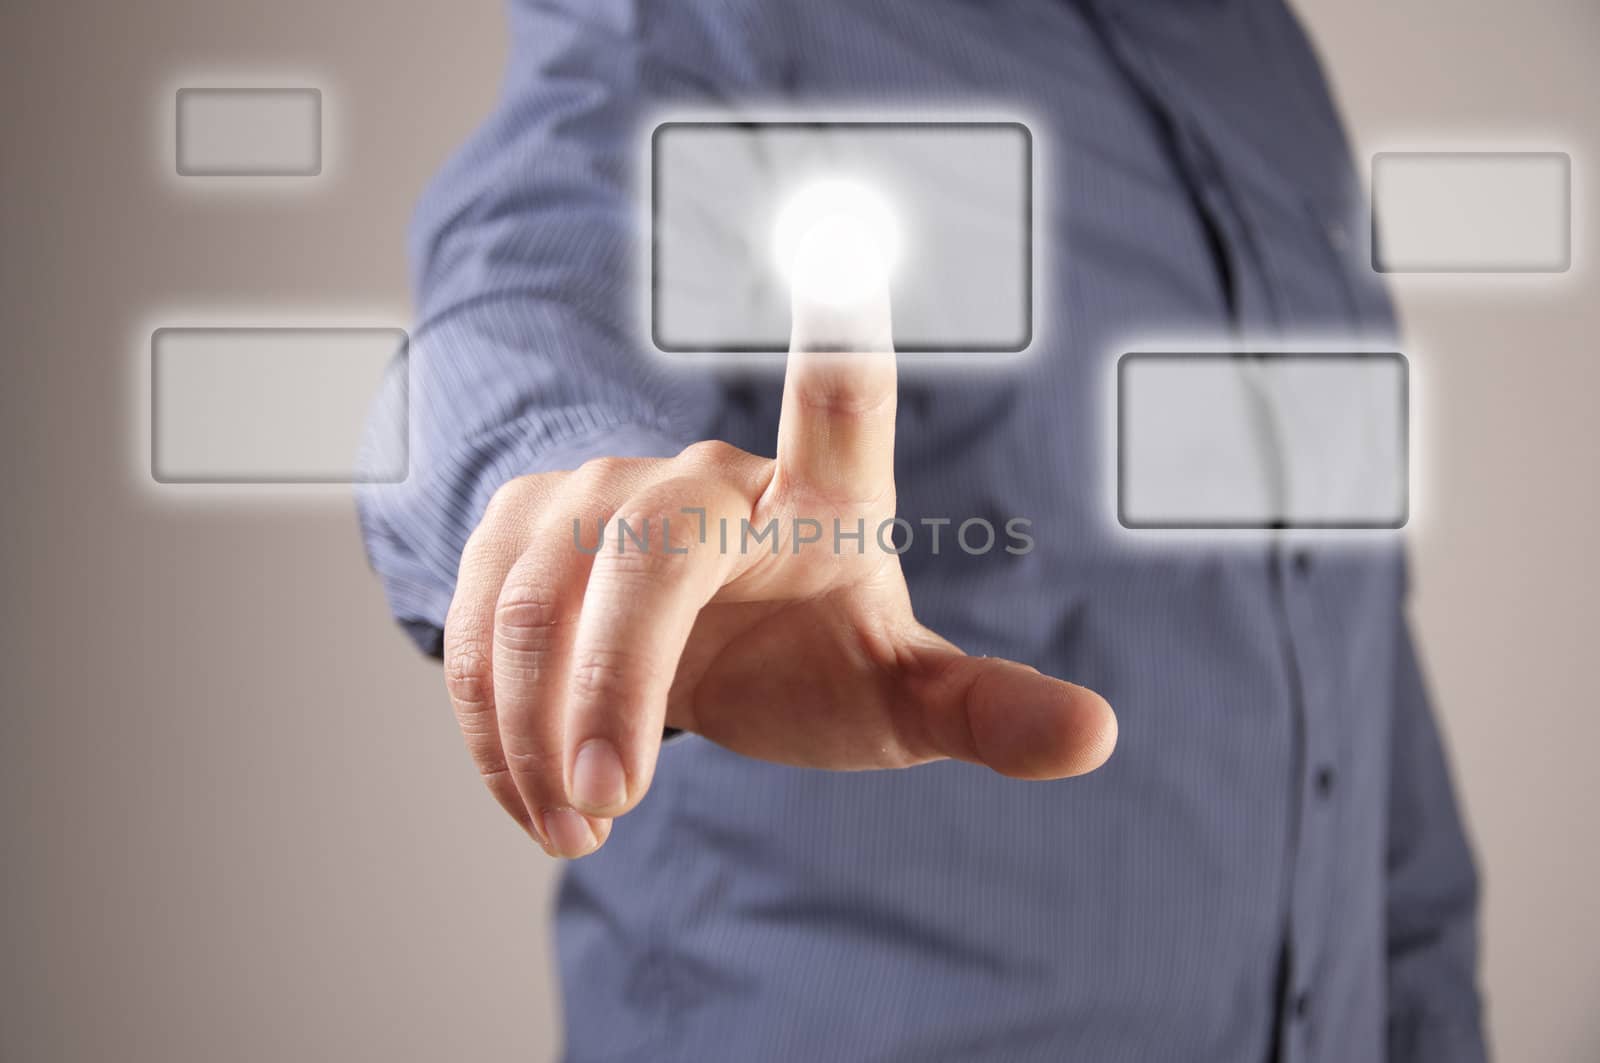 hand pushing a button on a touch screen interface, blur man background